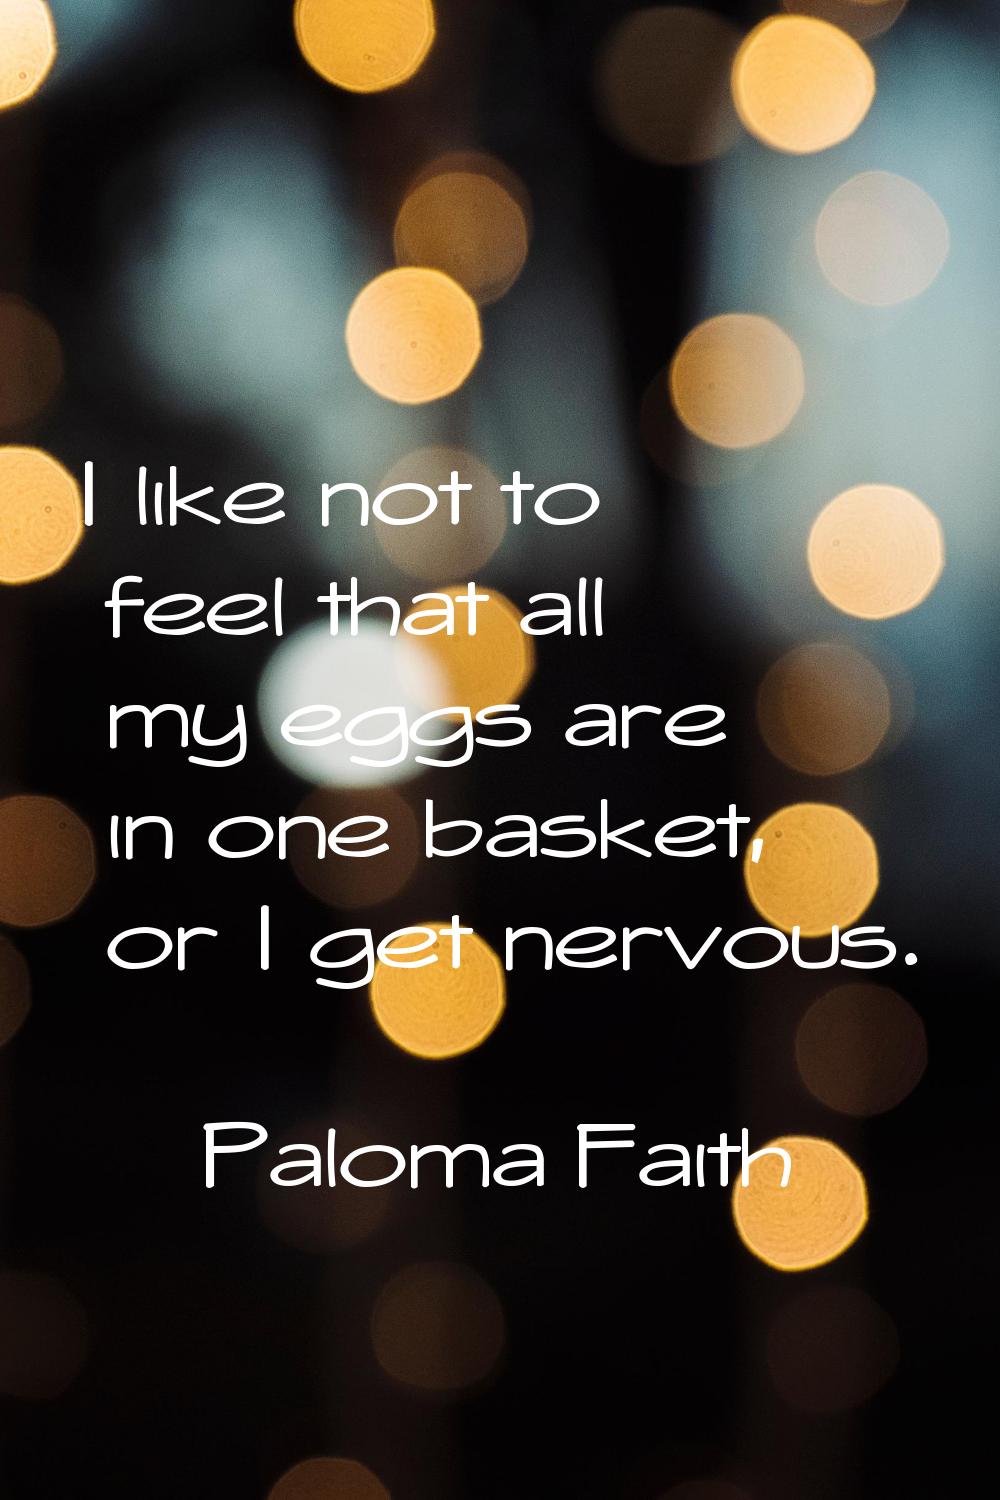 I like not to feel that all my eggs are in one basket, or I get nervous.